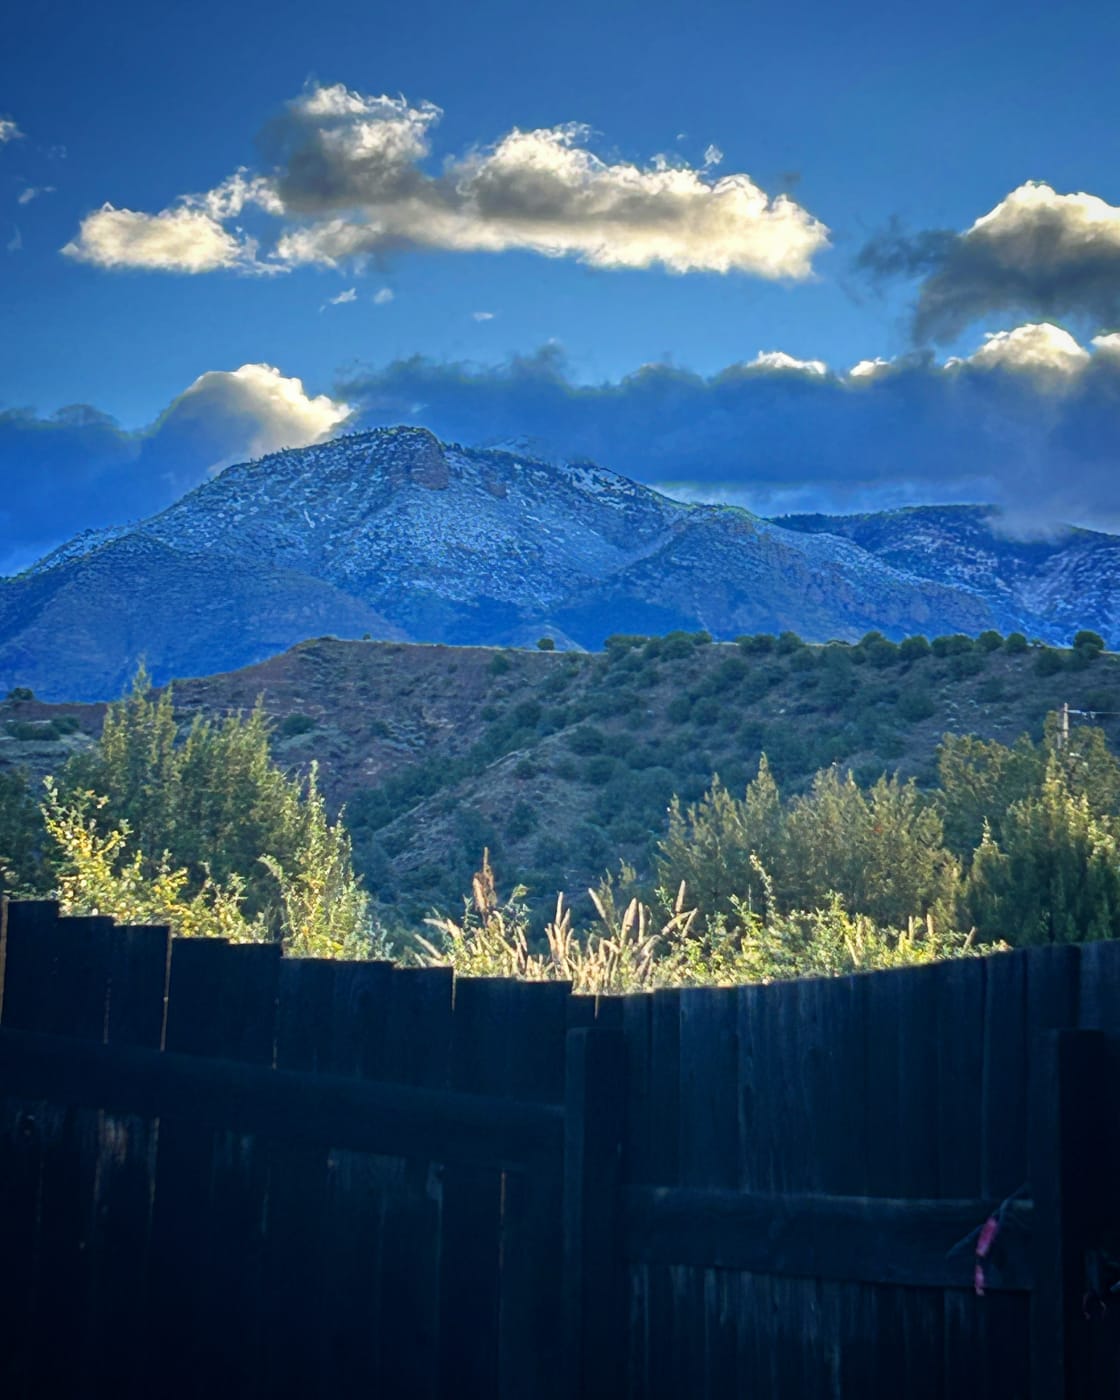 Privacy fencing along sides of camp. Mogollon Mountains in view.